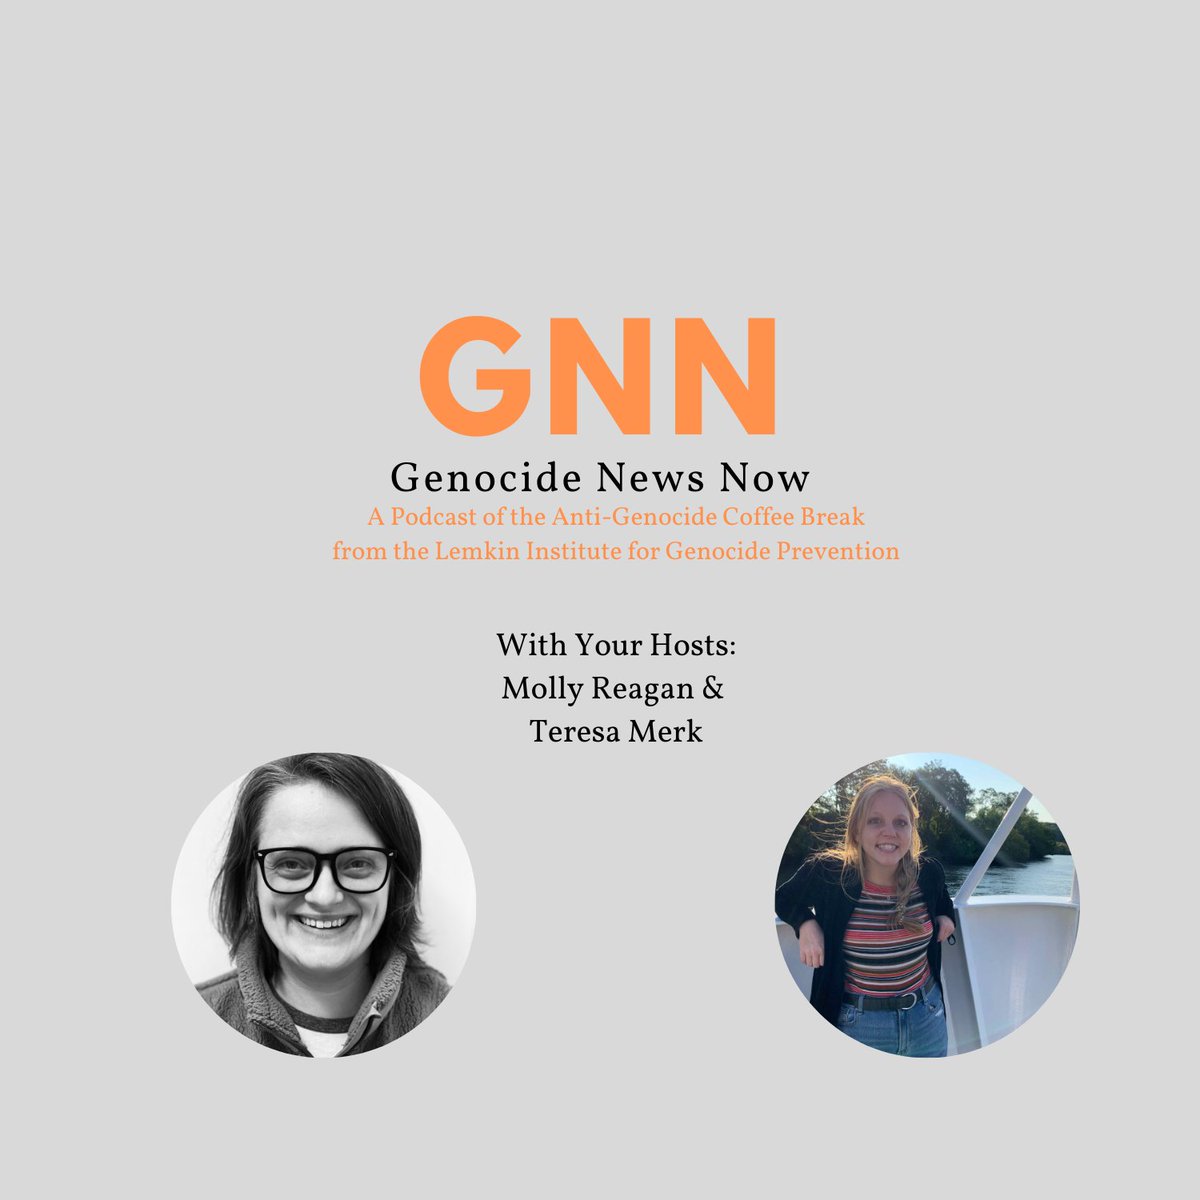 Check out the newest episode of Genocide News Now. This time, we have stories from 🇭🇹 #Haiti, 🇪🇹 #Ethiopia, and 🇸🇩 #Sudan. We also shine a light on student protestors. Listen here: bit.ly/4bbfJoi